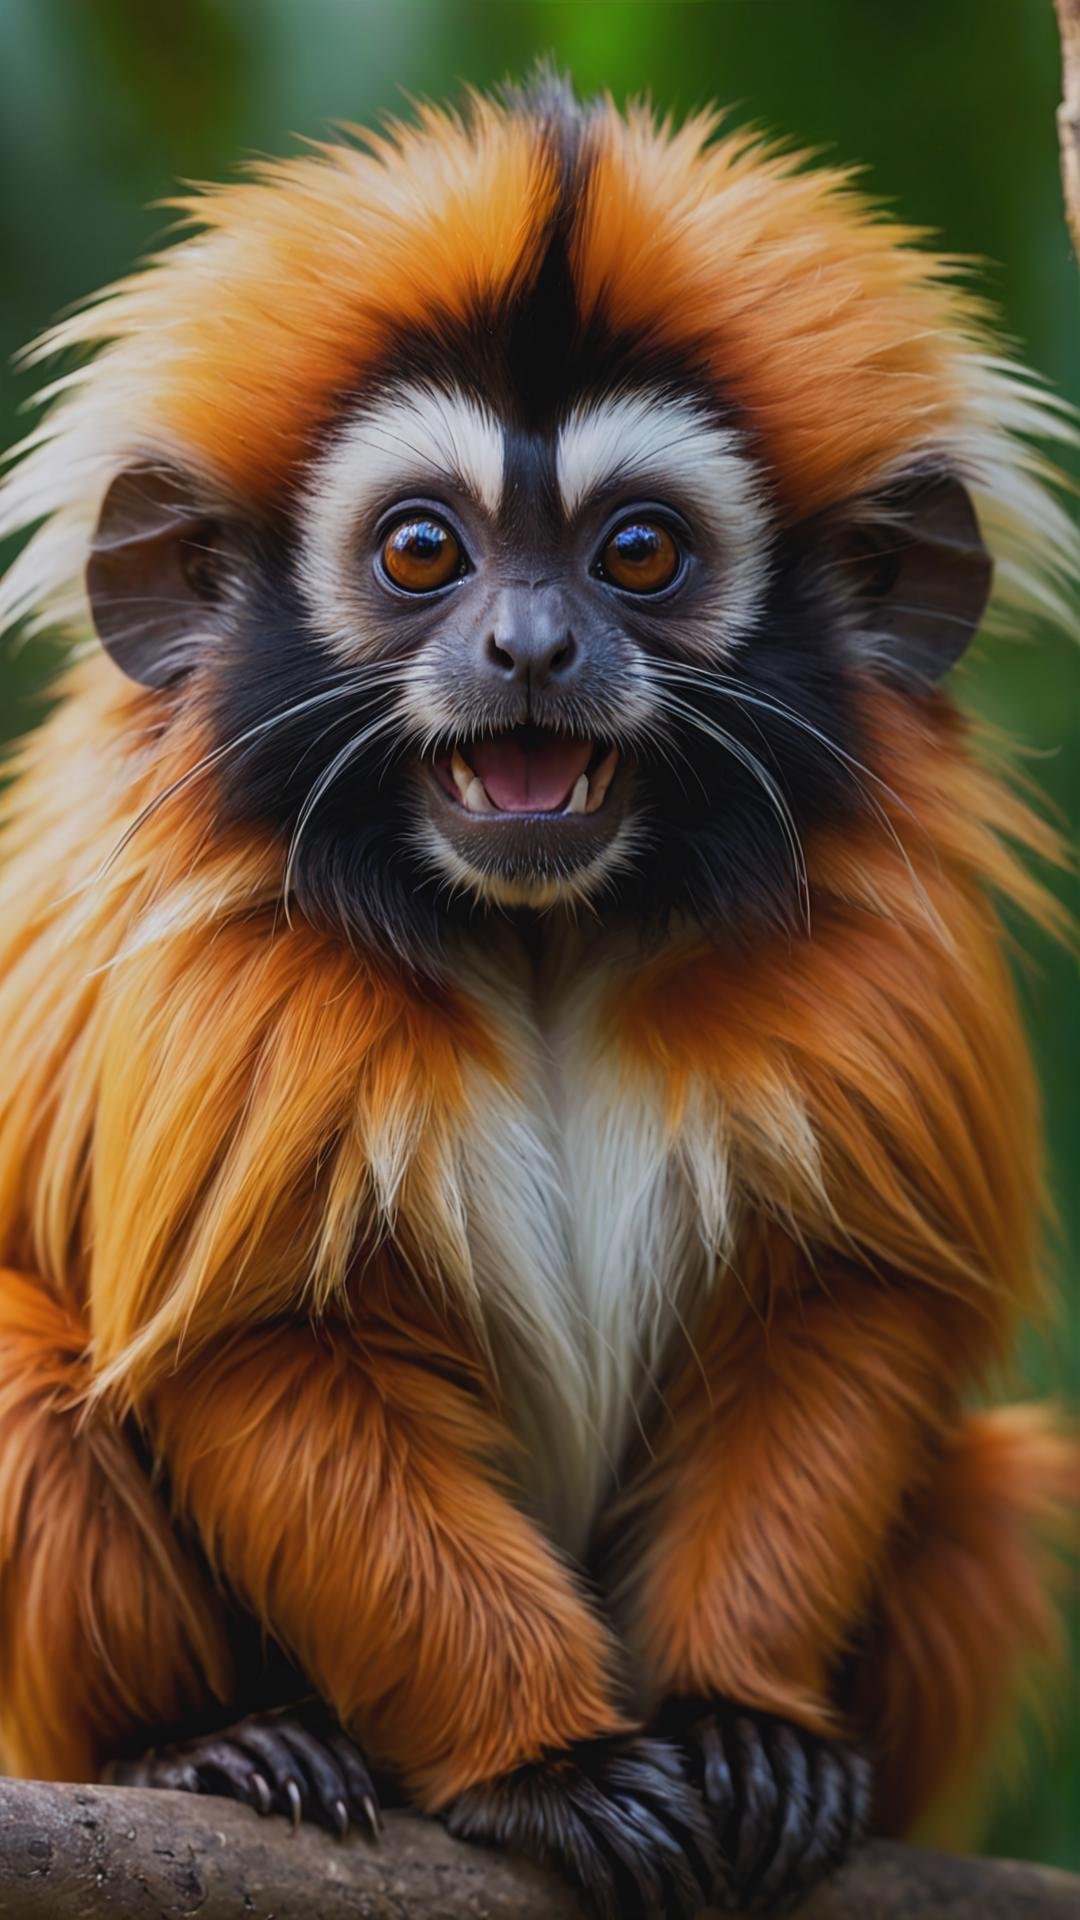 RAW, Macro, Concept art, huge, cute Tamarin monkey, long orange fur, funny, jungle paradise, depth of field,  (add more details:1.4), <lora:add-detail-xl:1>, The lighting should be warm and inviting, casting a gentle glow and highlighting the rich colors of its flesh. The background should feature a blurred, out-of-focus to emphasize as the main focus of the image. Use a high-resolution camera with a fast shutter speed to capture every detail and its surroundings.